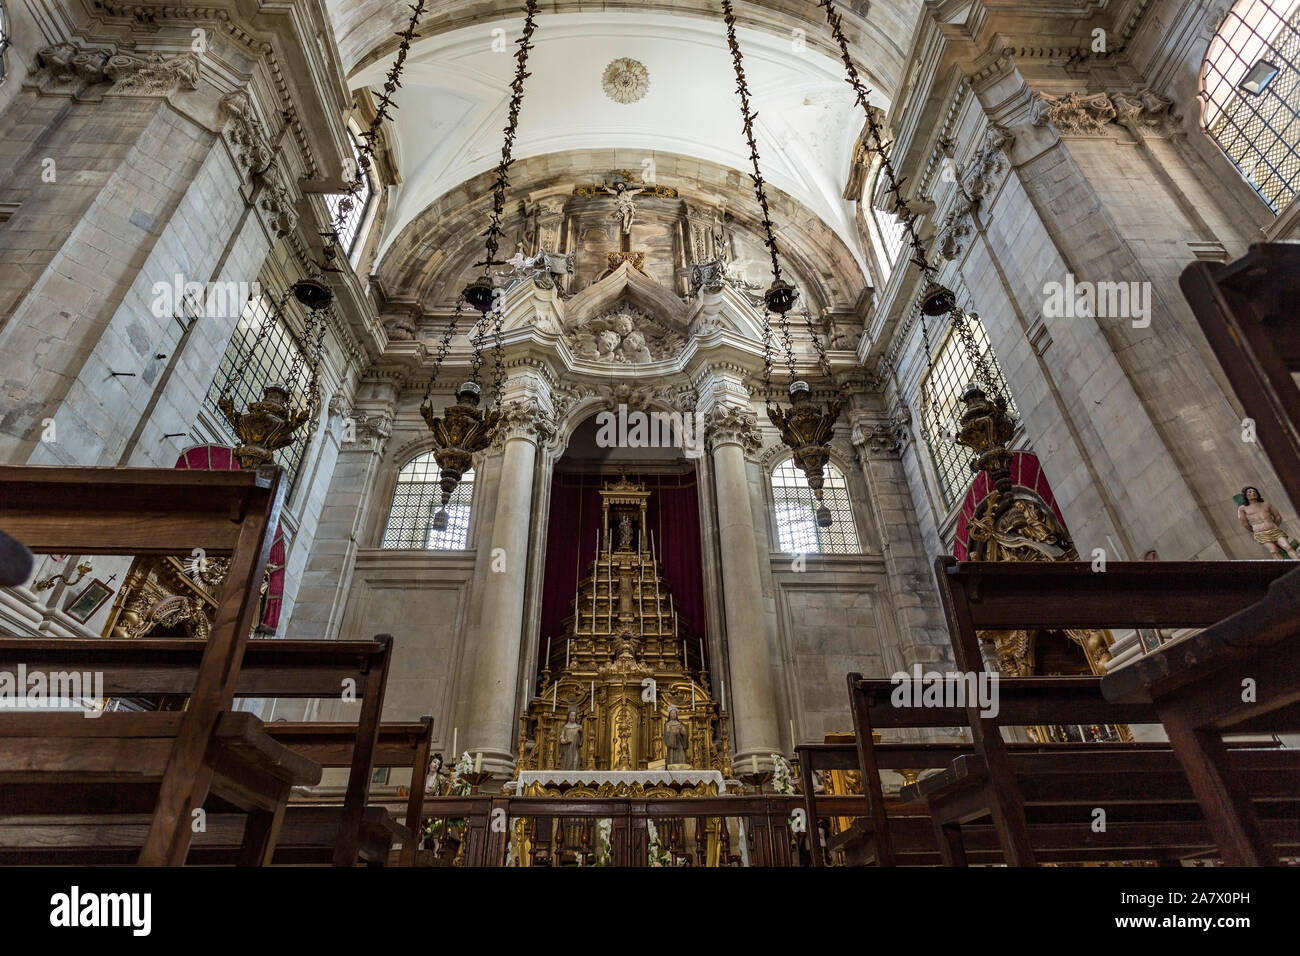 View of the Baroque and Italianized Neoclassical main chapel of the Church of the Monastery of Saint Mary of Lorvao, Coimbra, Portugal Stock Photo